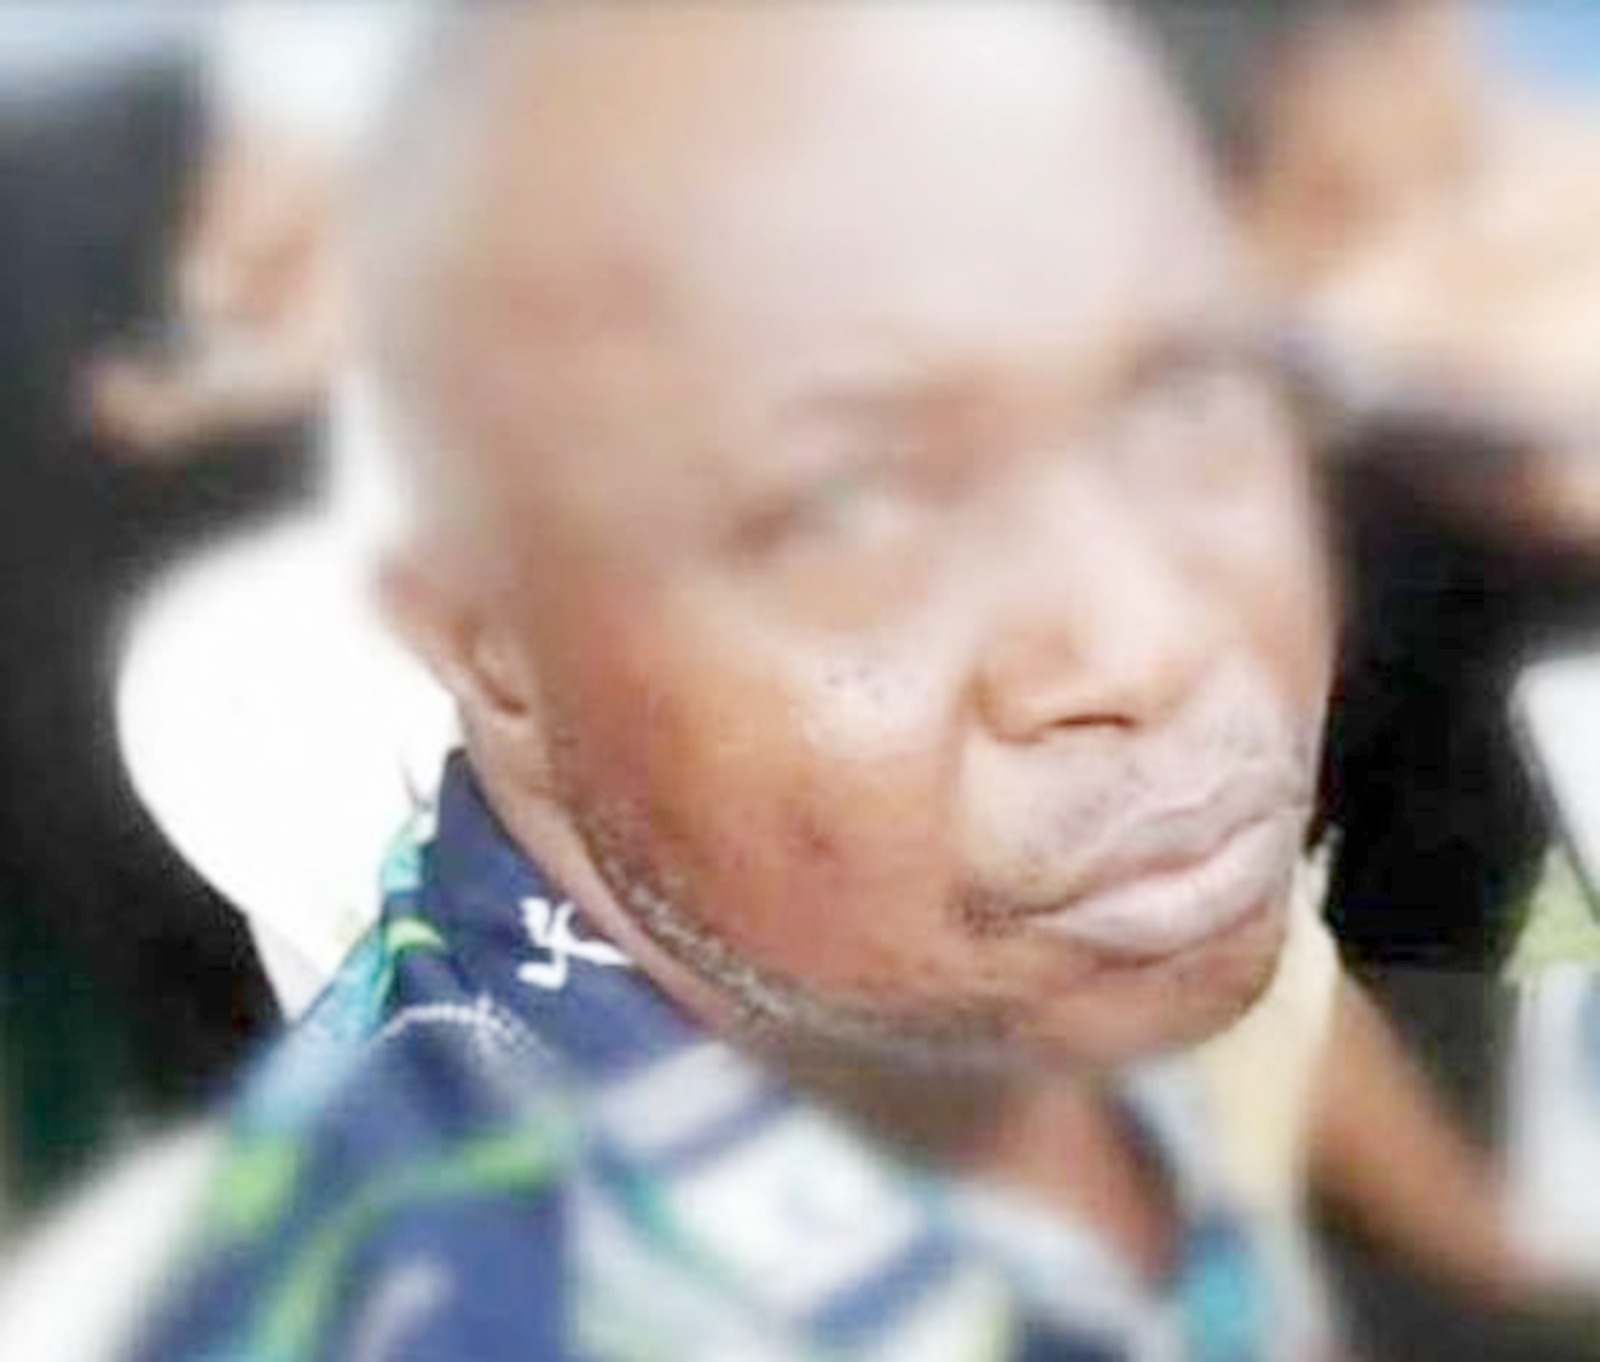 Medical doctor arrested for allegedly killing pregnant woman, selling her baby in Rivers